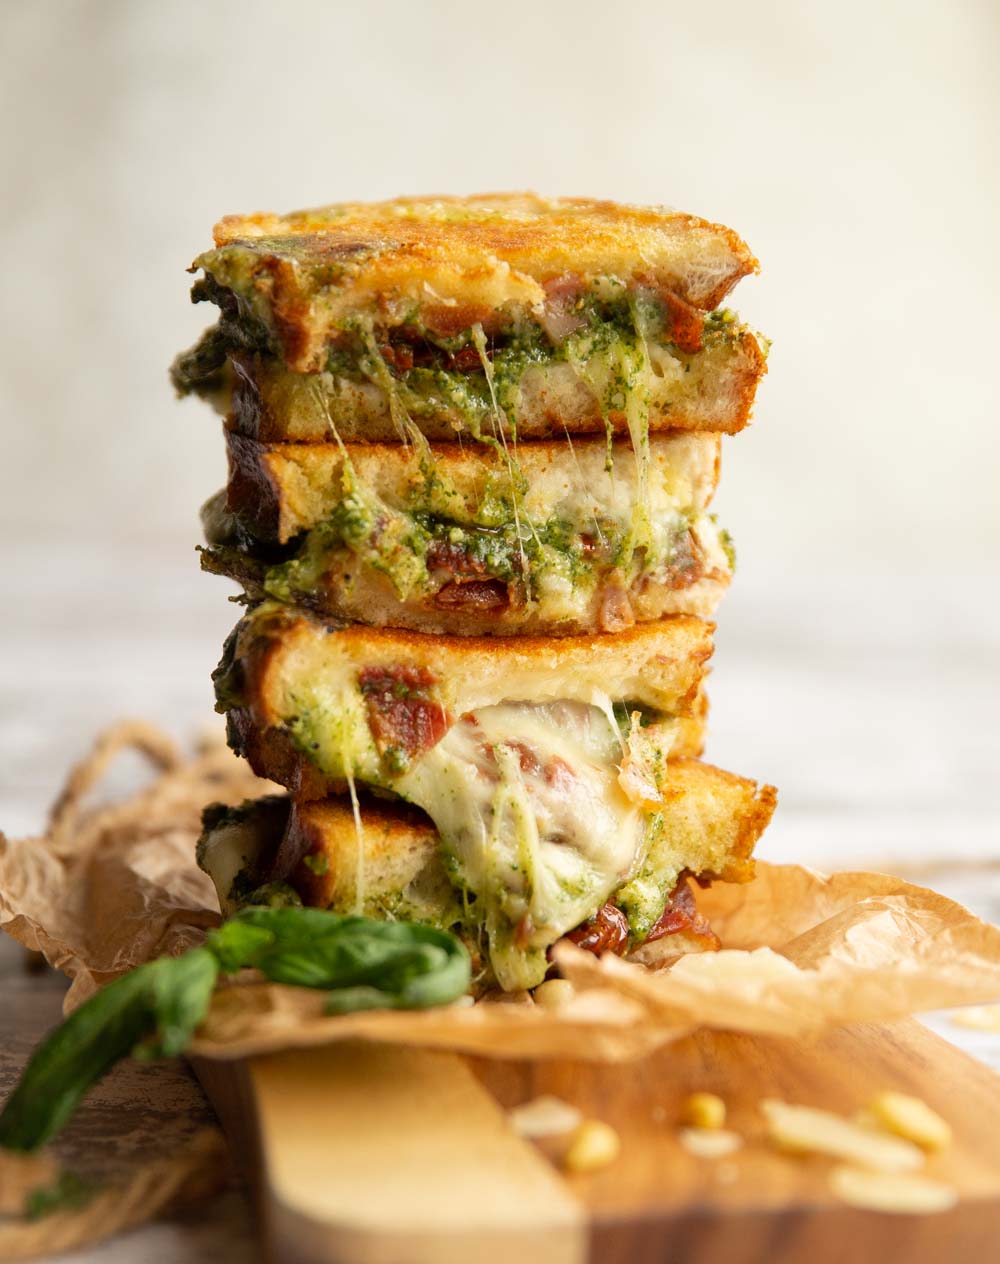 A stack of grilled cheese sandwiches topped with a generous layer of melted cheese and fresh spinach leaves